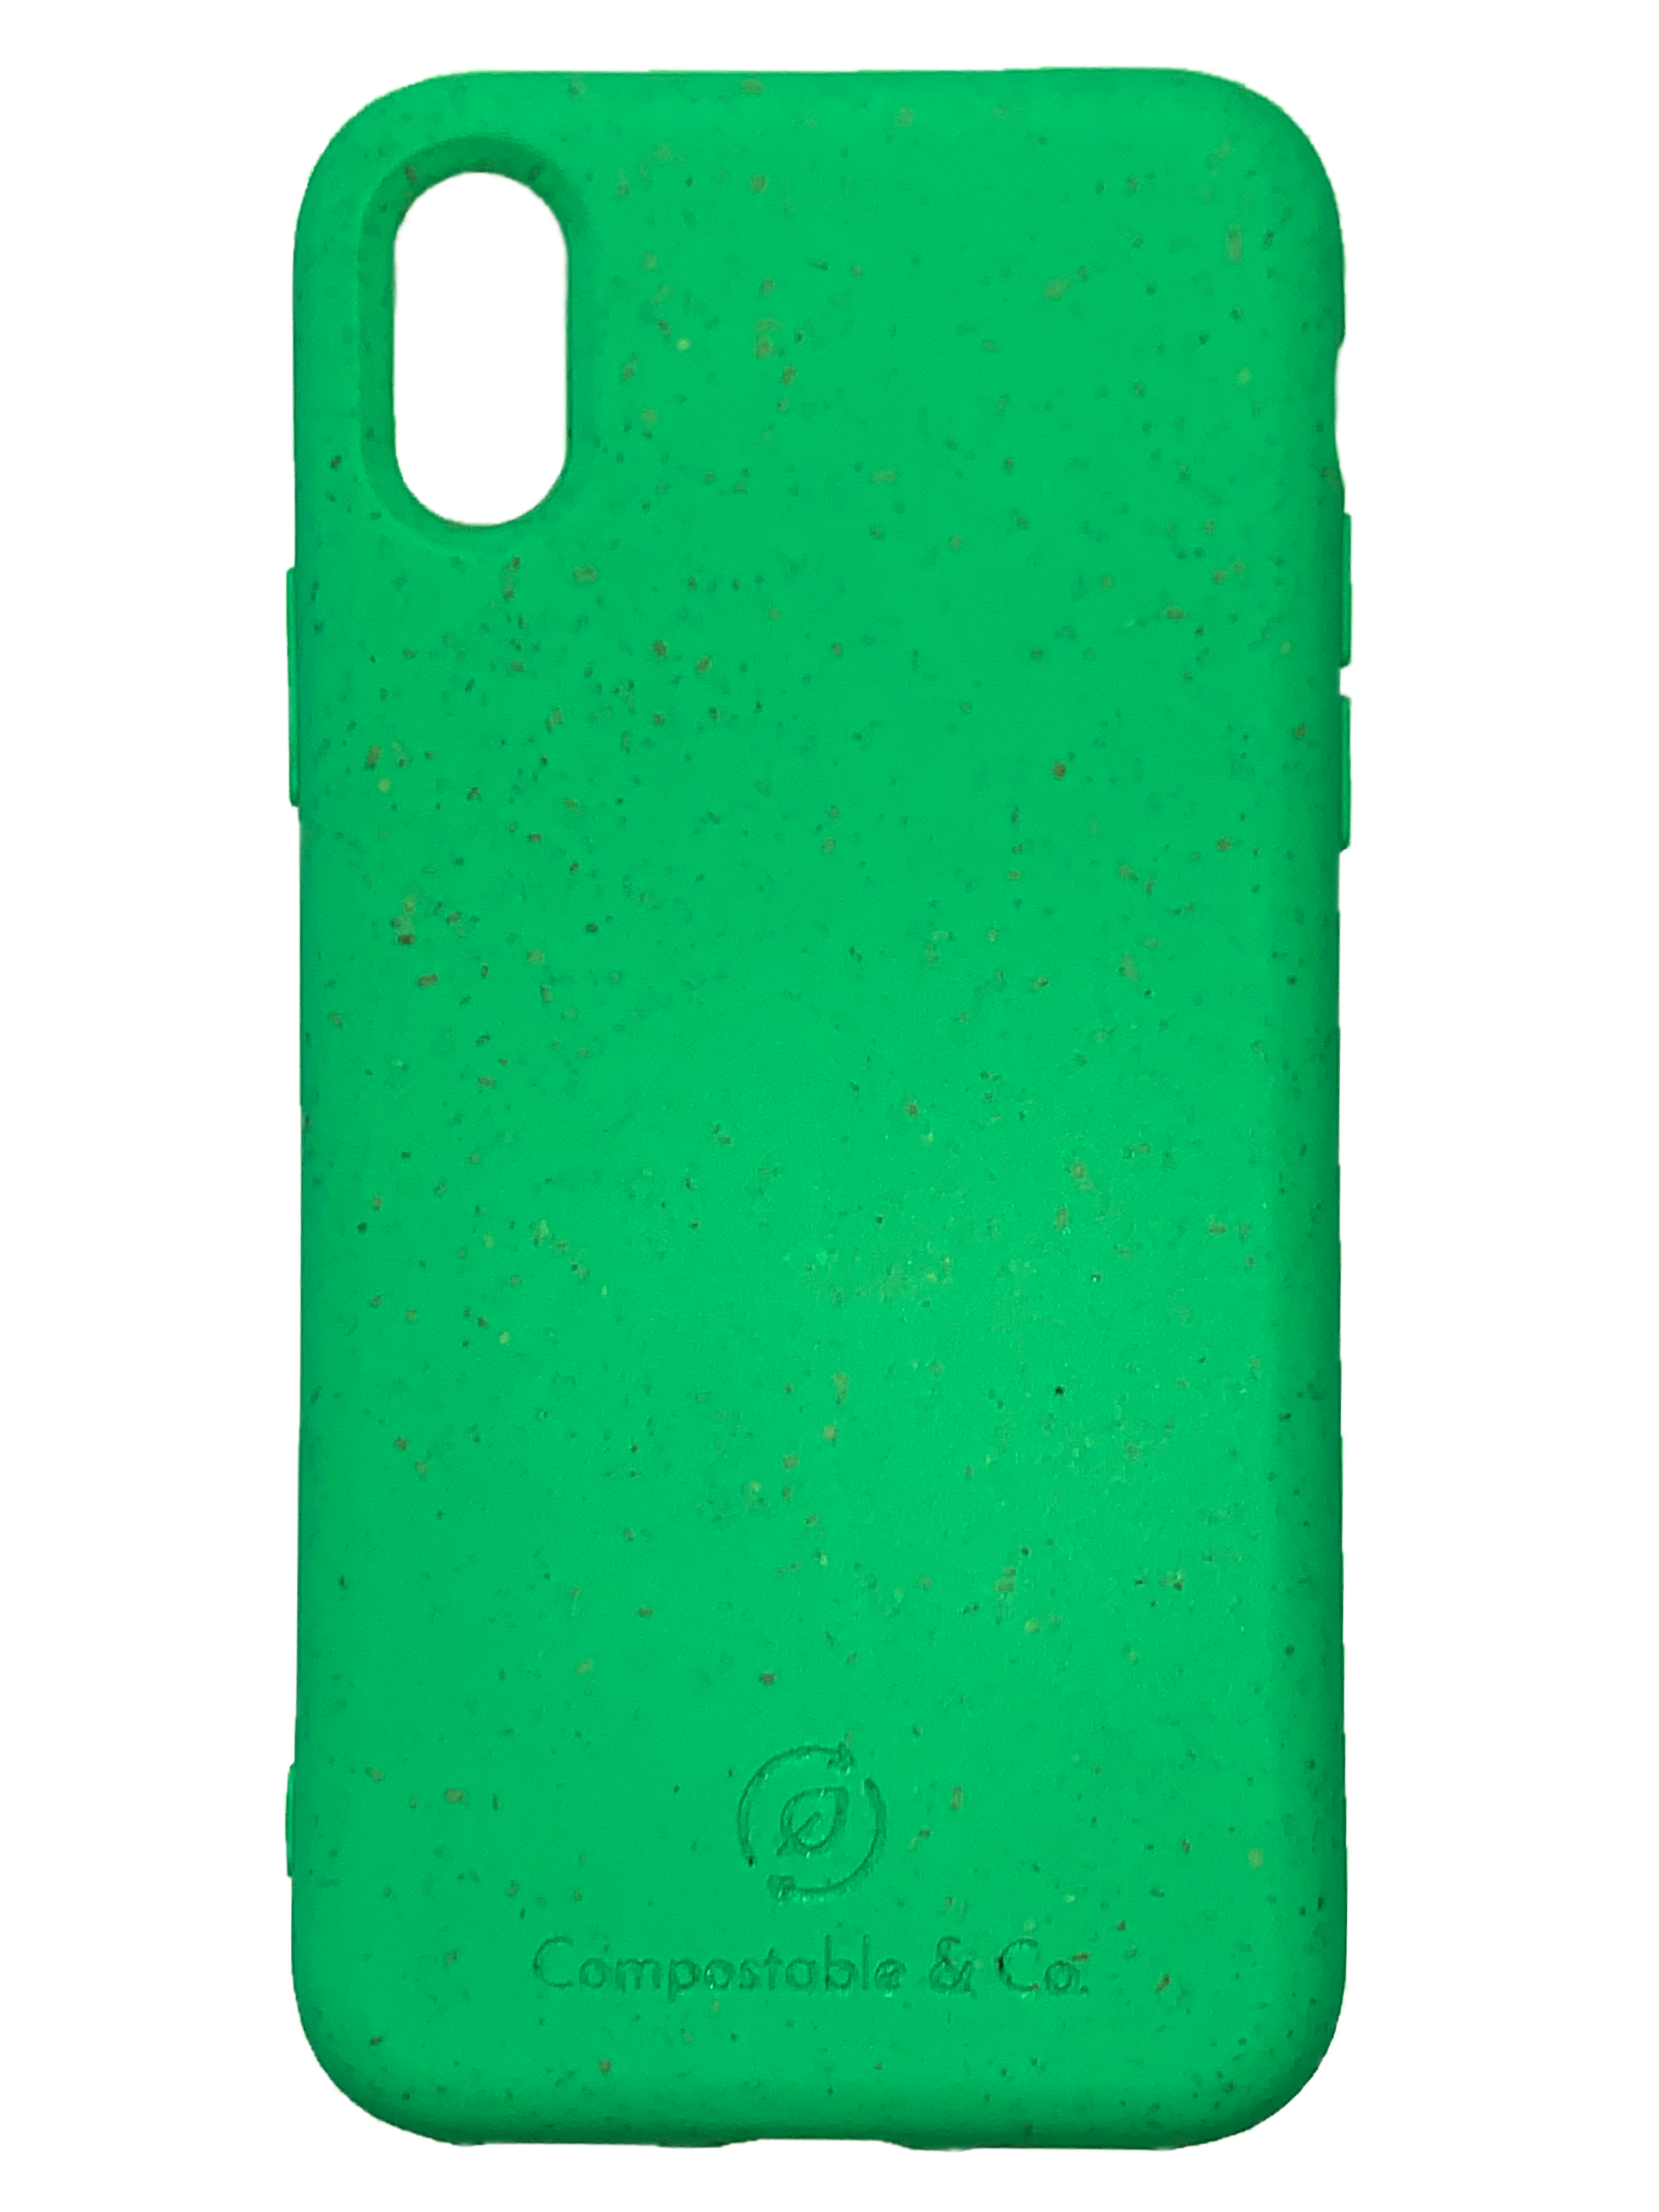 Compostable & Co. iPhone x / xs green biodegradable phone case